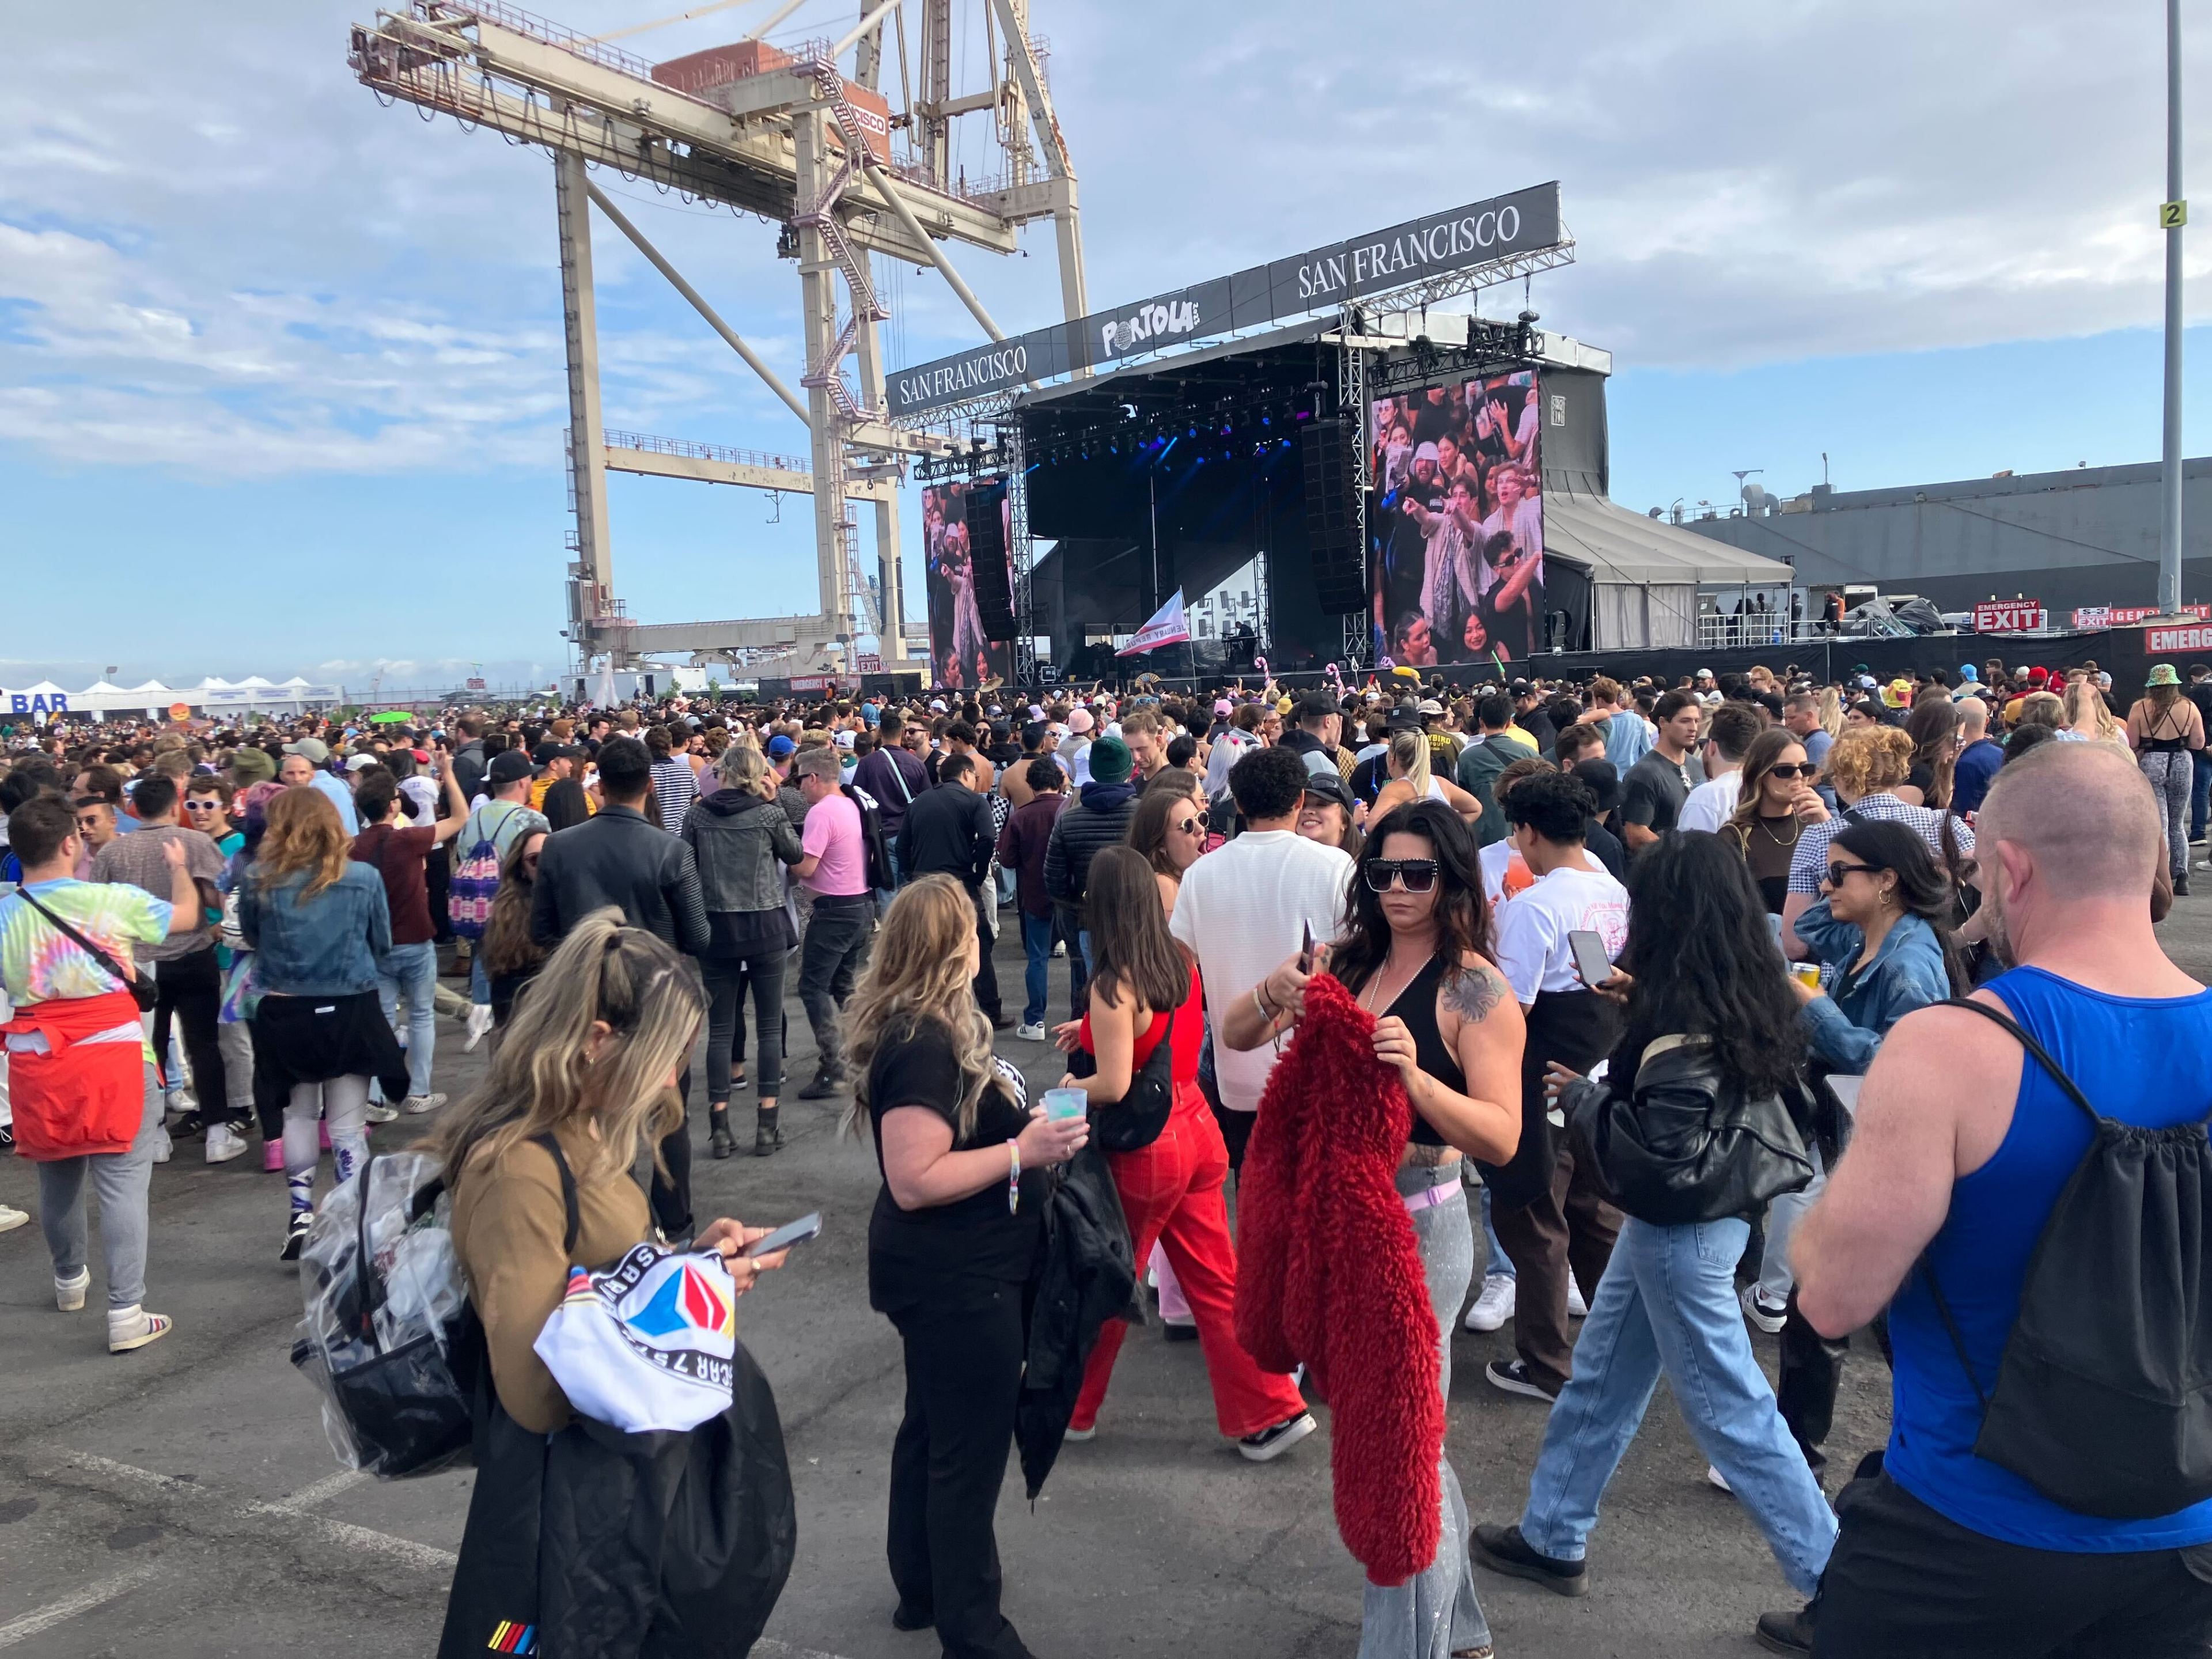 A lively outdoor music festival crowd near a stage with large screens, under daylight with industrial cranes in the background.